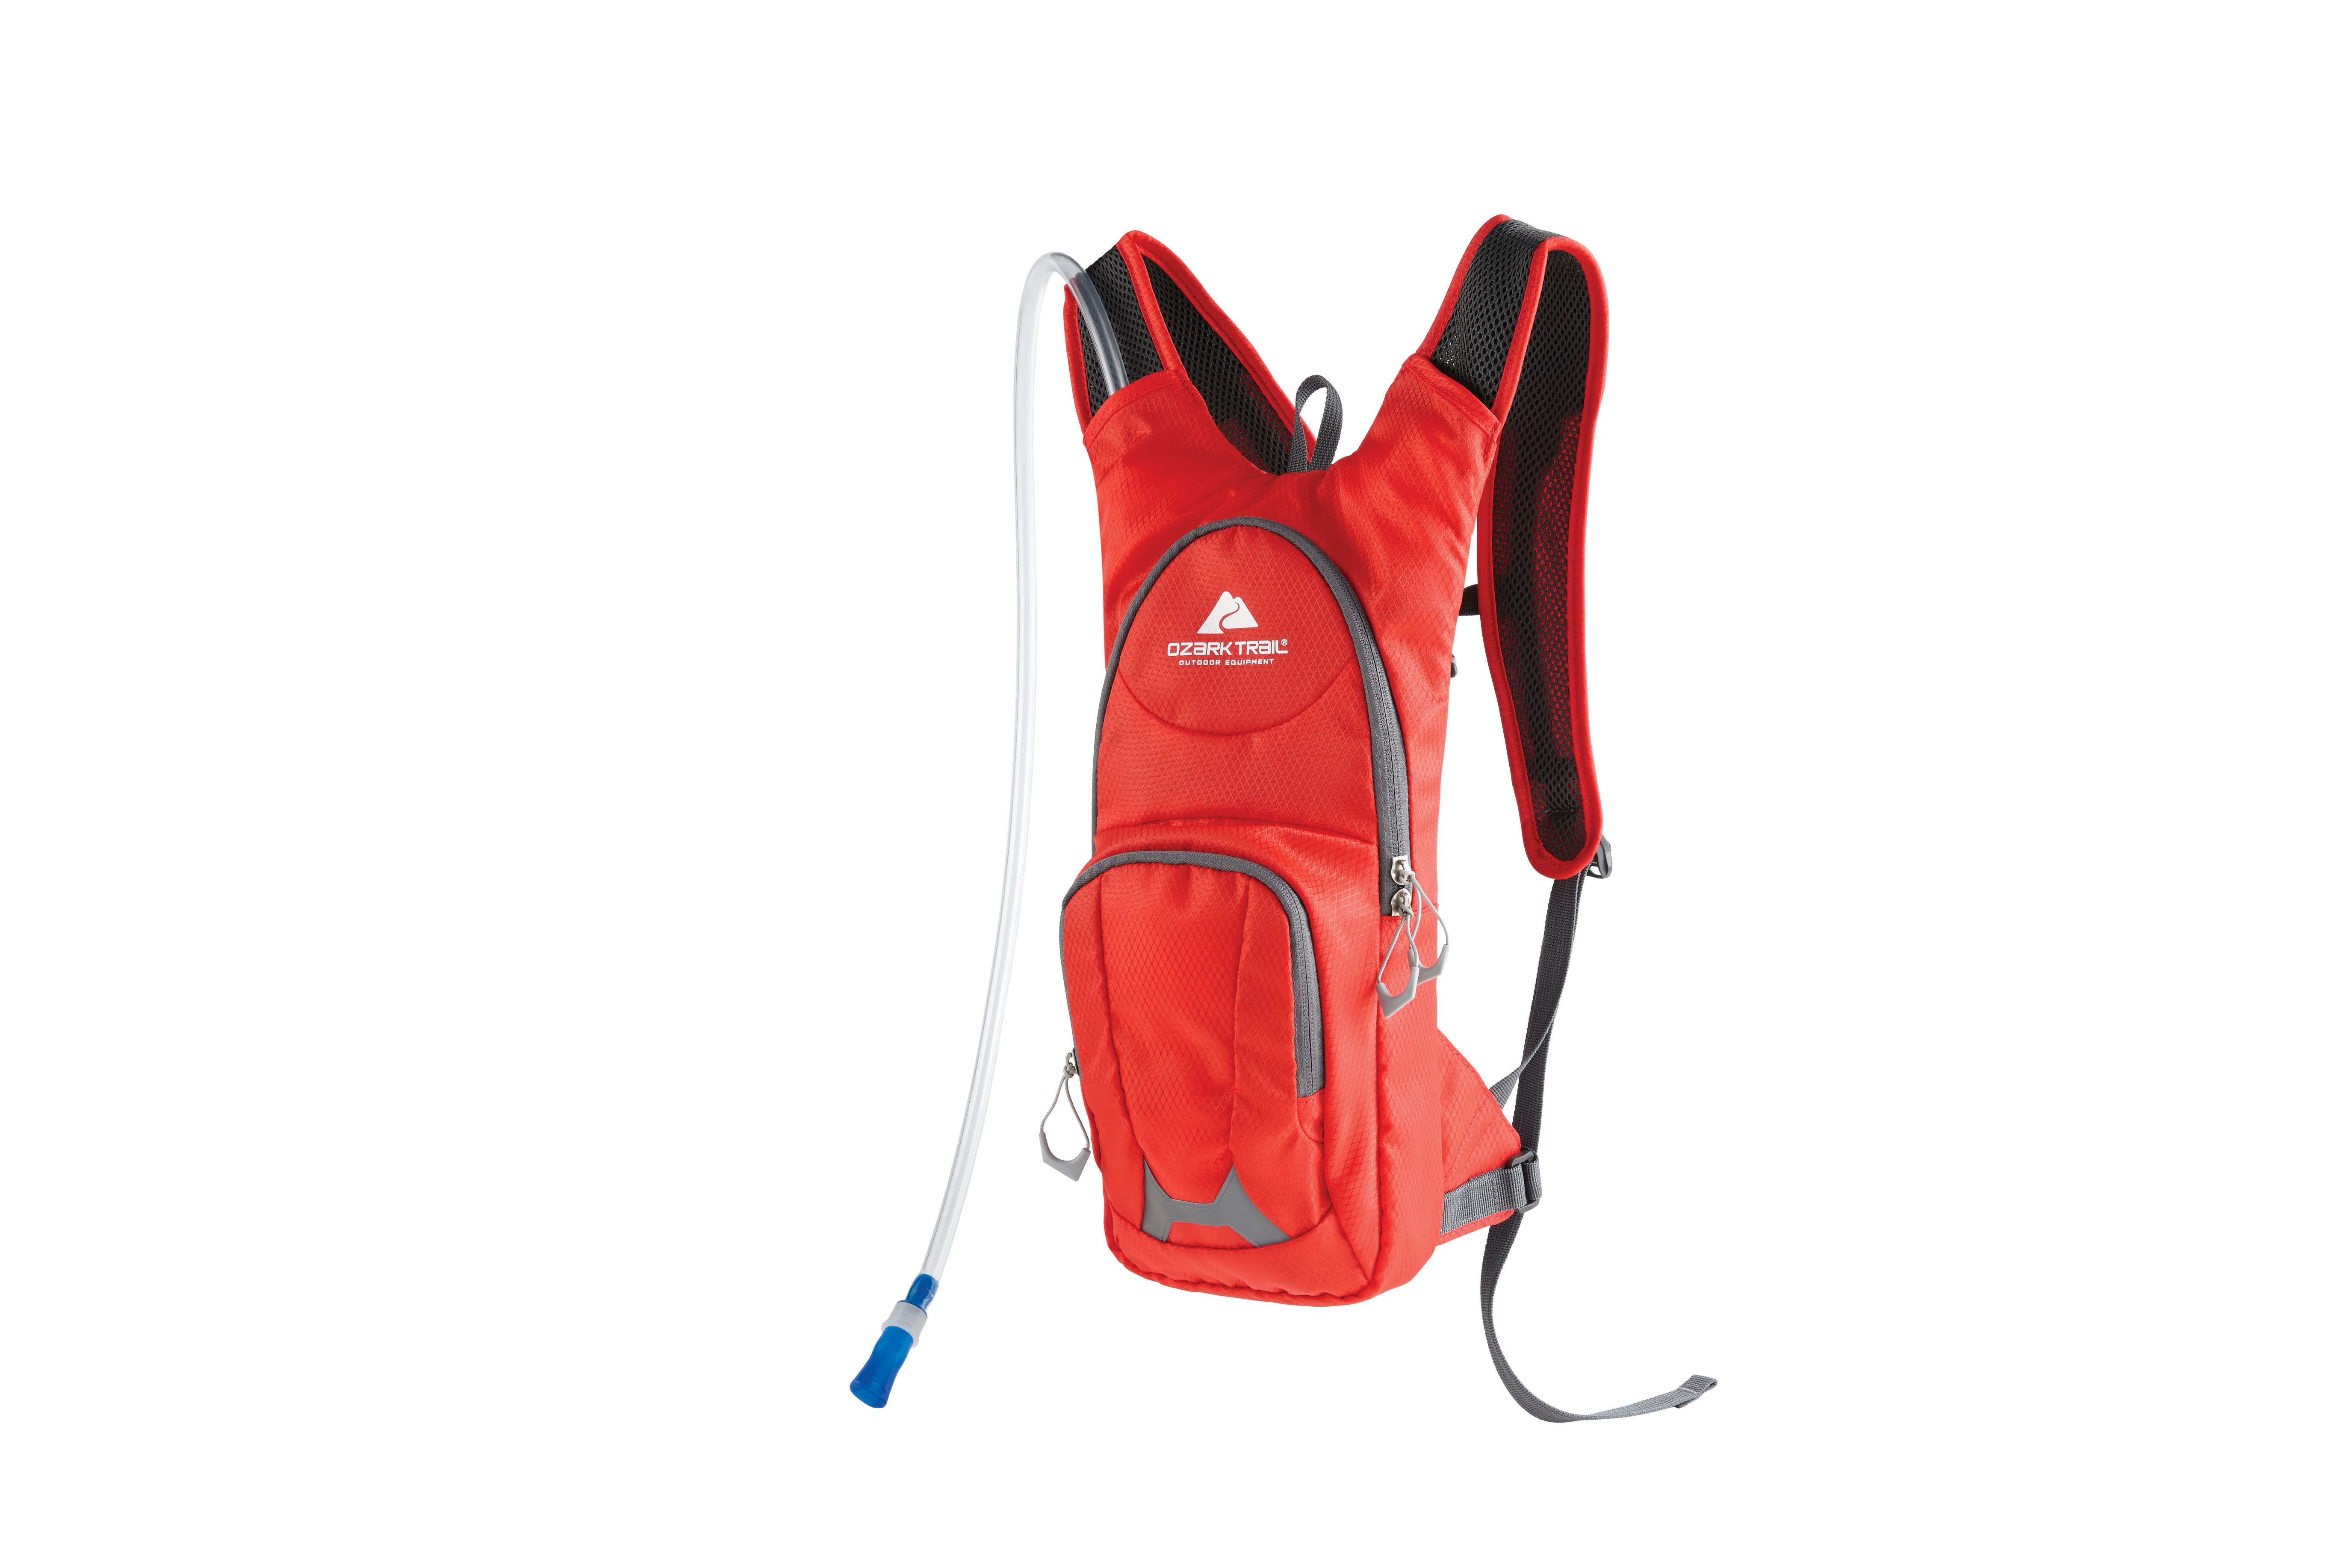 Ozark Trail 5 Ltr Adult Hydration Hiking Backpack, Unisex, Red - image 1 of 5